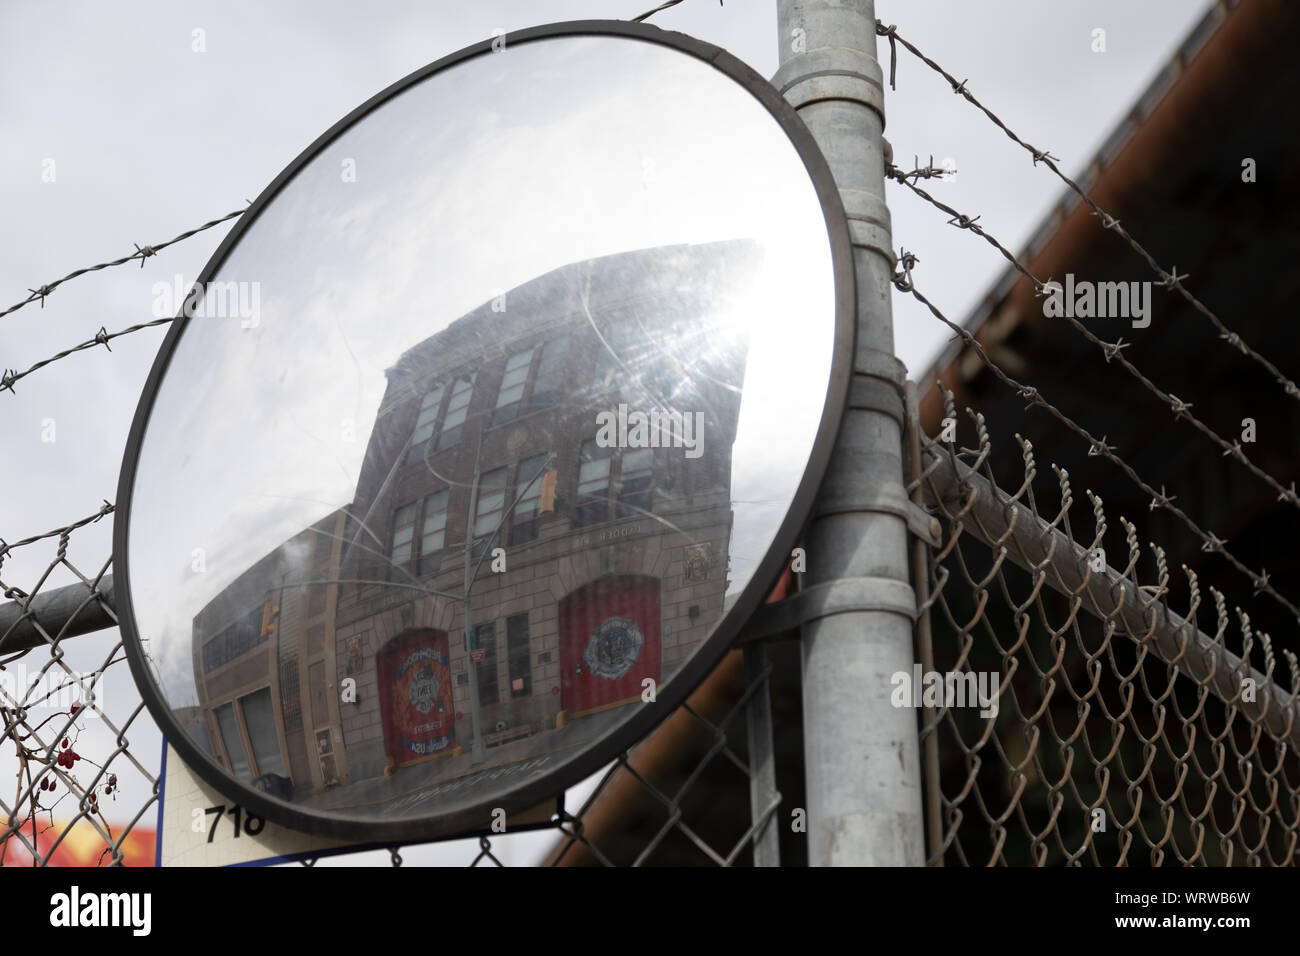 FDNY fire station reflected in mirror in Brooklyn, NY Stock Photo